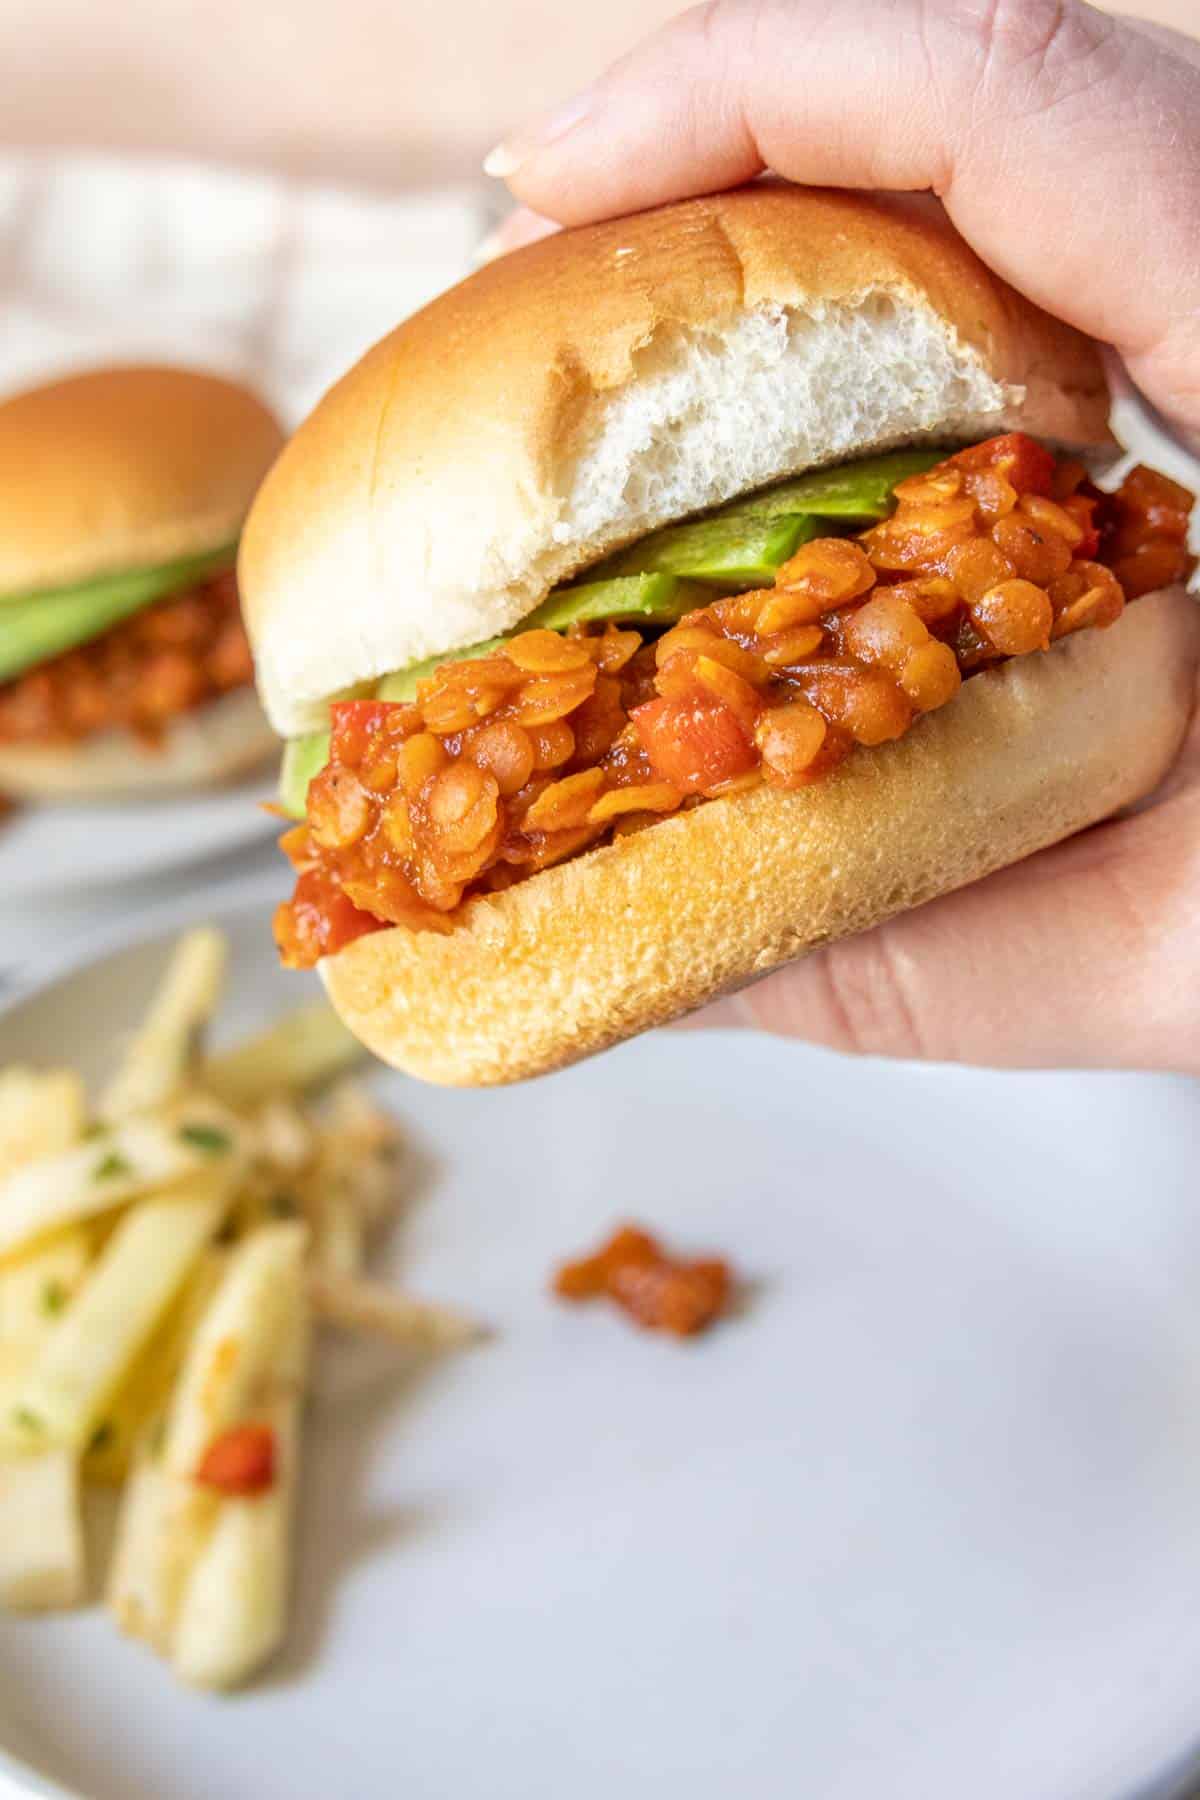 A person holding a sandwich with lentils and avocado.